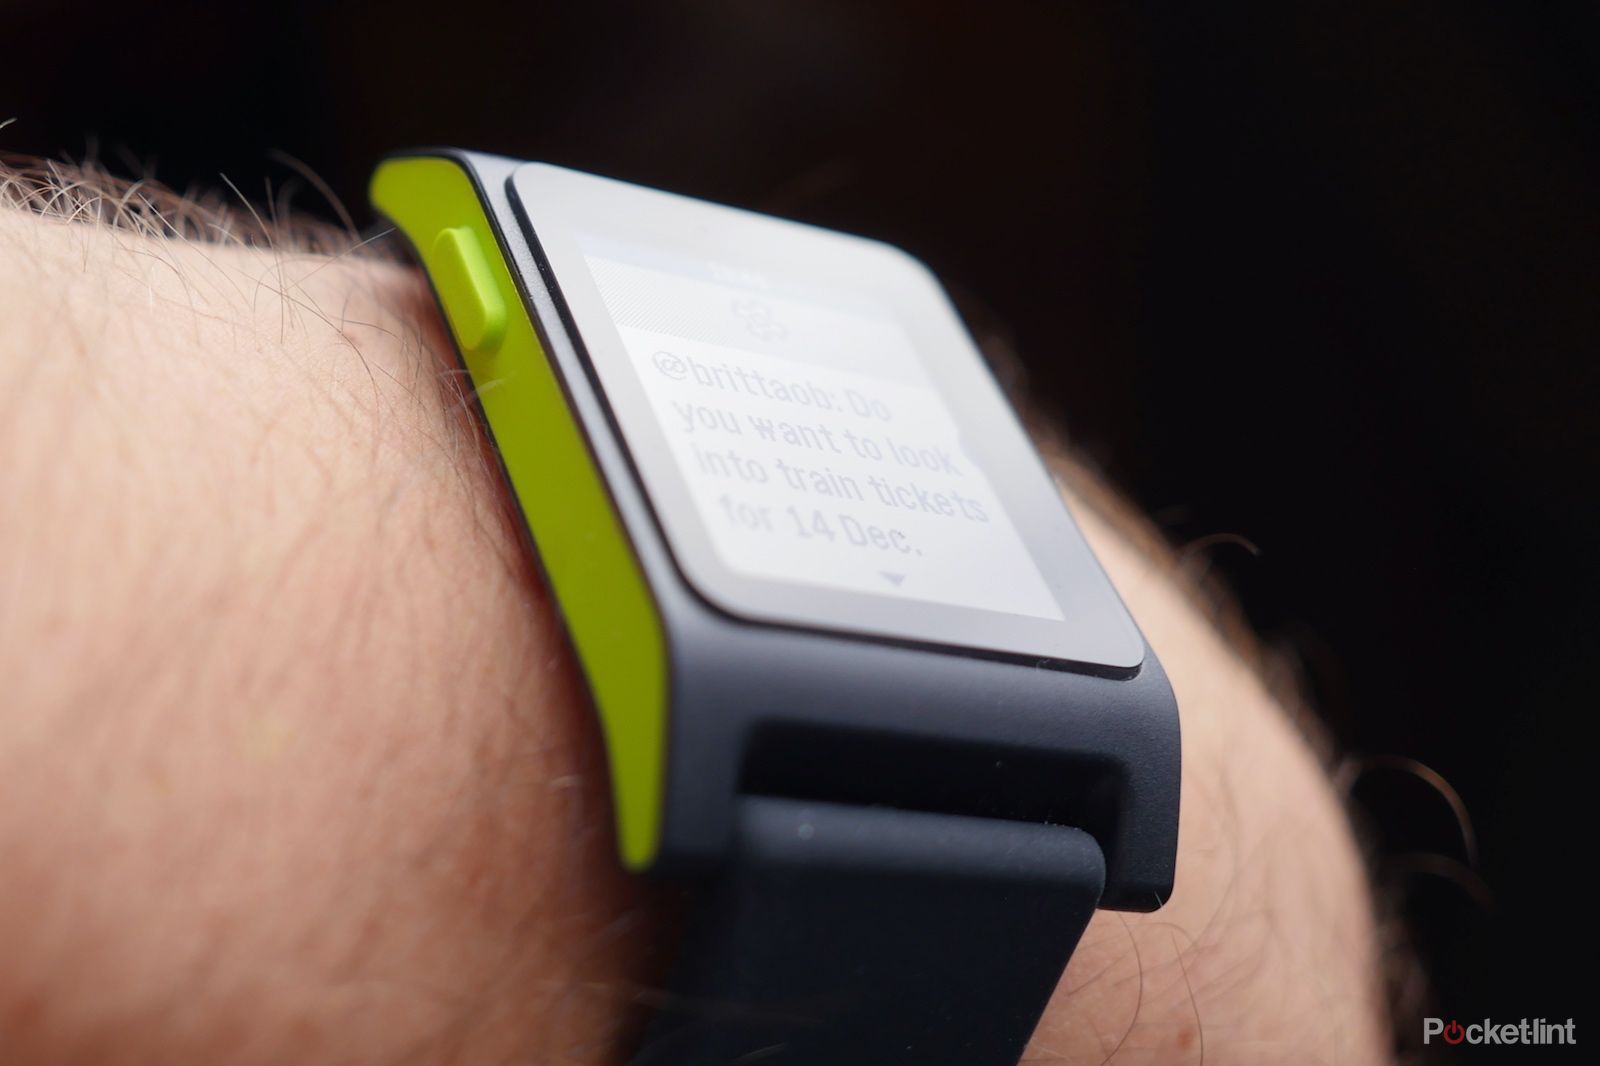 pebble app update allows watches to kind of still work after fitbit sale image 1